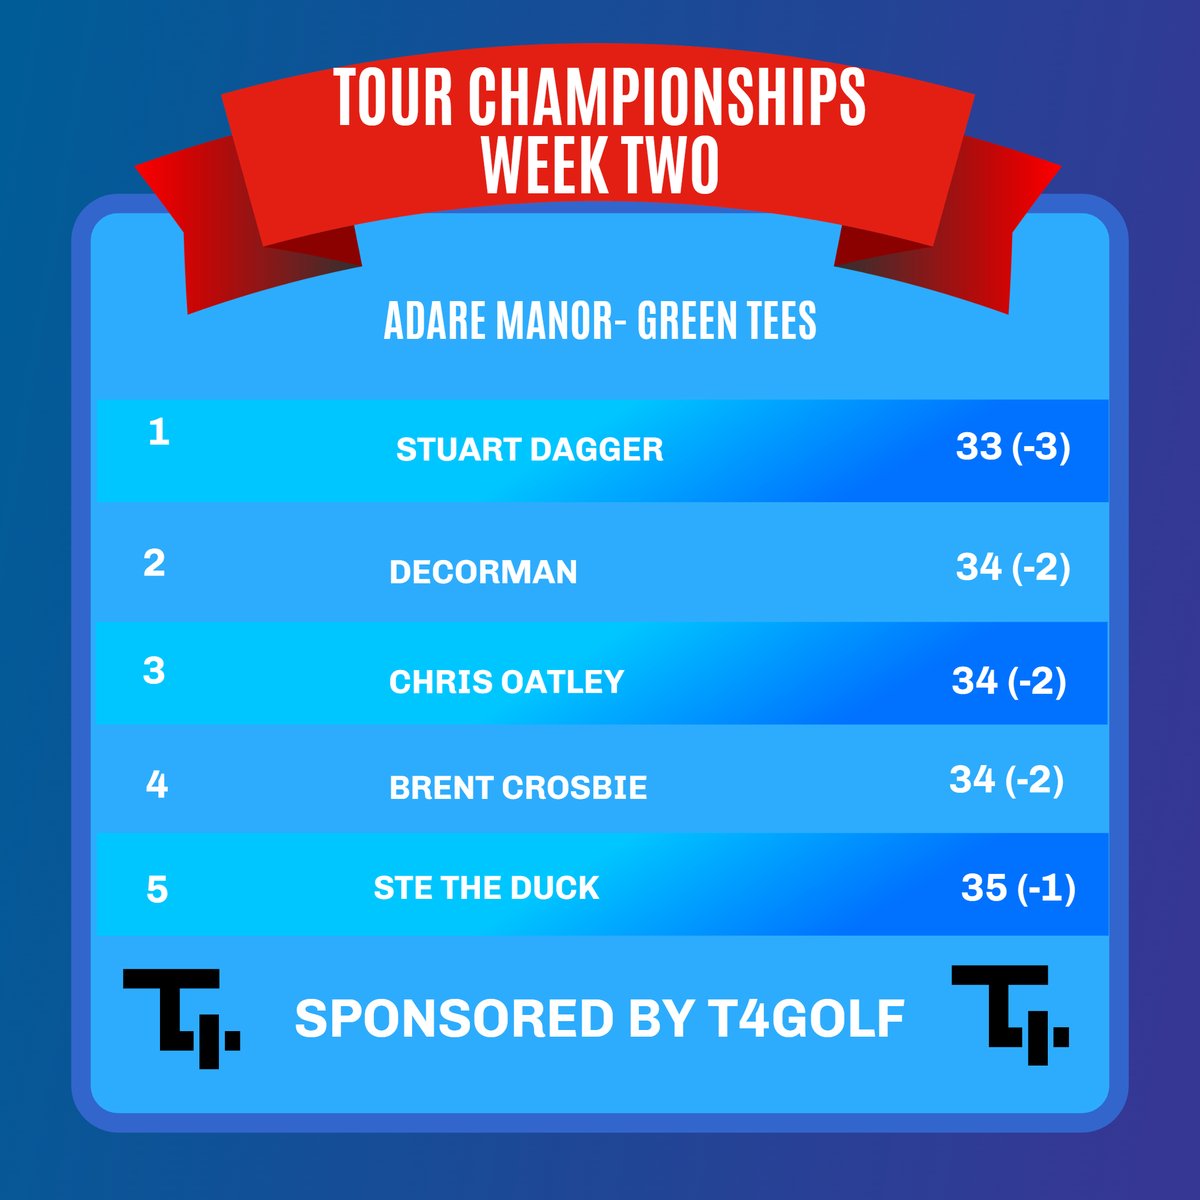 Our up to date leaderboard for this weeks Tour Championship. there is still time to get yourself on the board as there is a big chasing pack sponsored by T4 Golf t4ourgolf.com